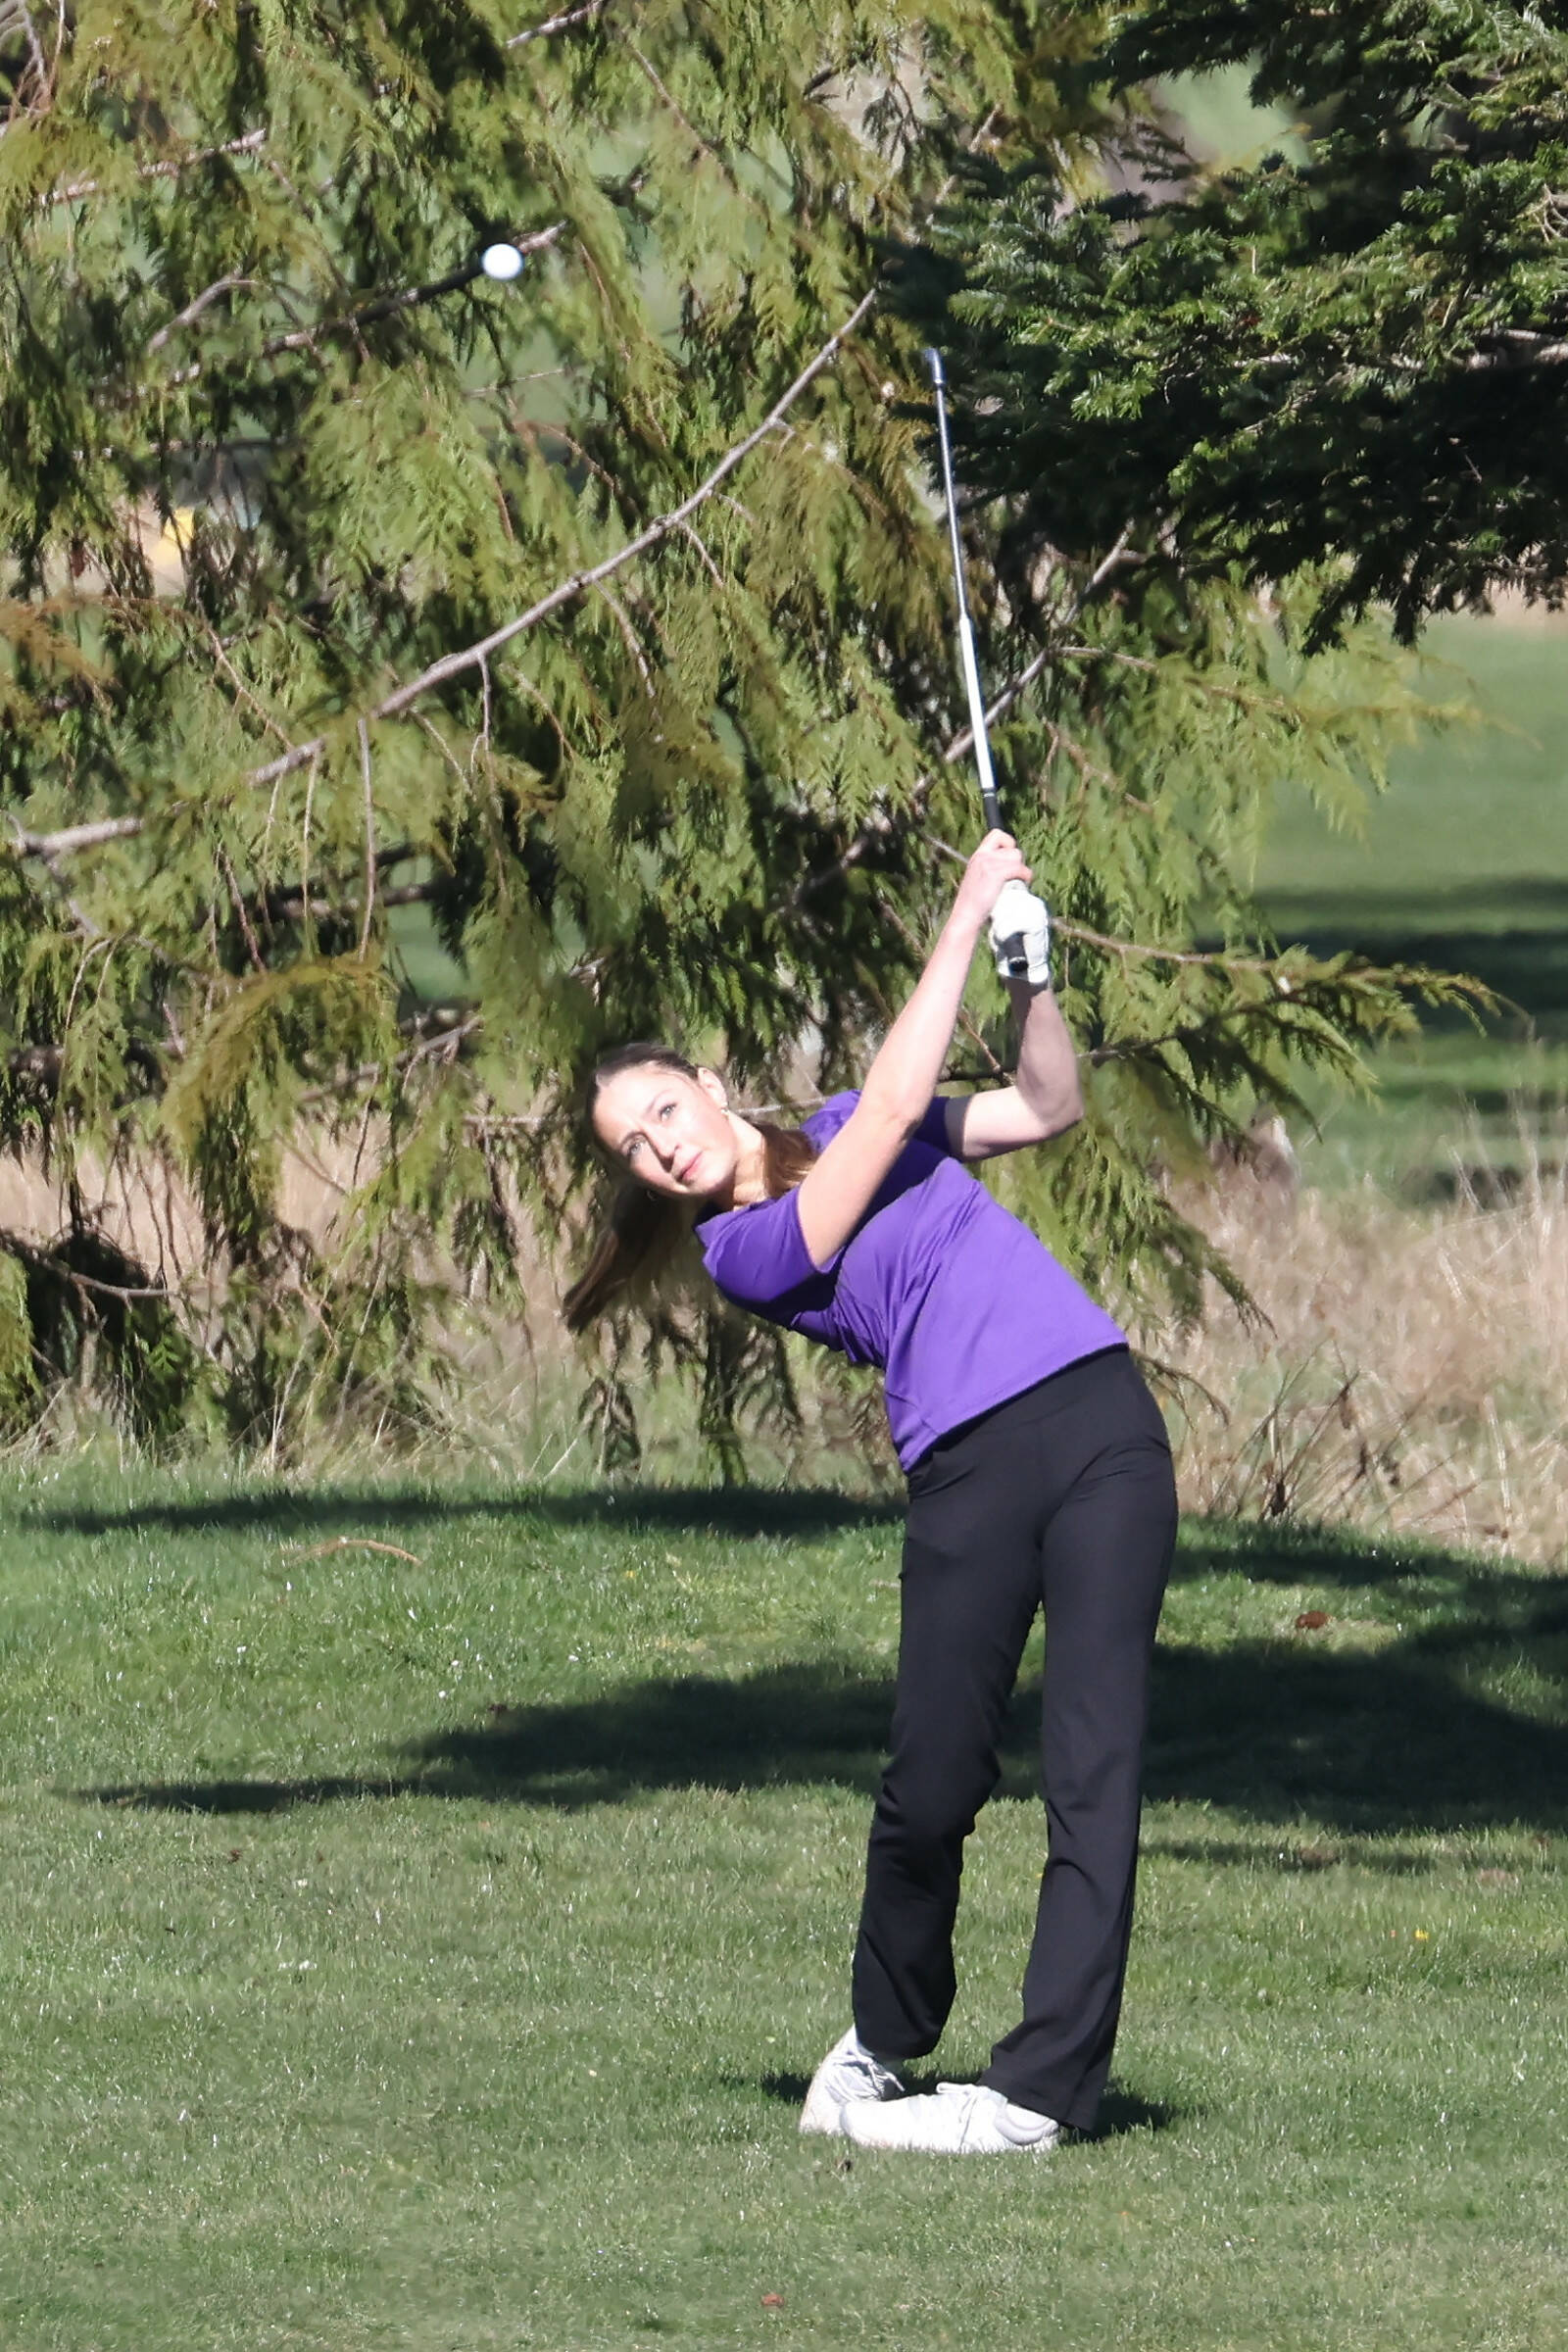 Oak Harbor girls golfer Addison Nations hits the ball during the Whidbey Shootout where the Wildcats competed against 15 other teams March 18 at the Whidbey Golf Club. Nations tied for seventh hitting 13-over-par 85. (Photo by John Fisken)